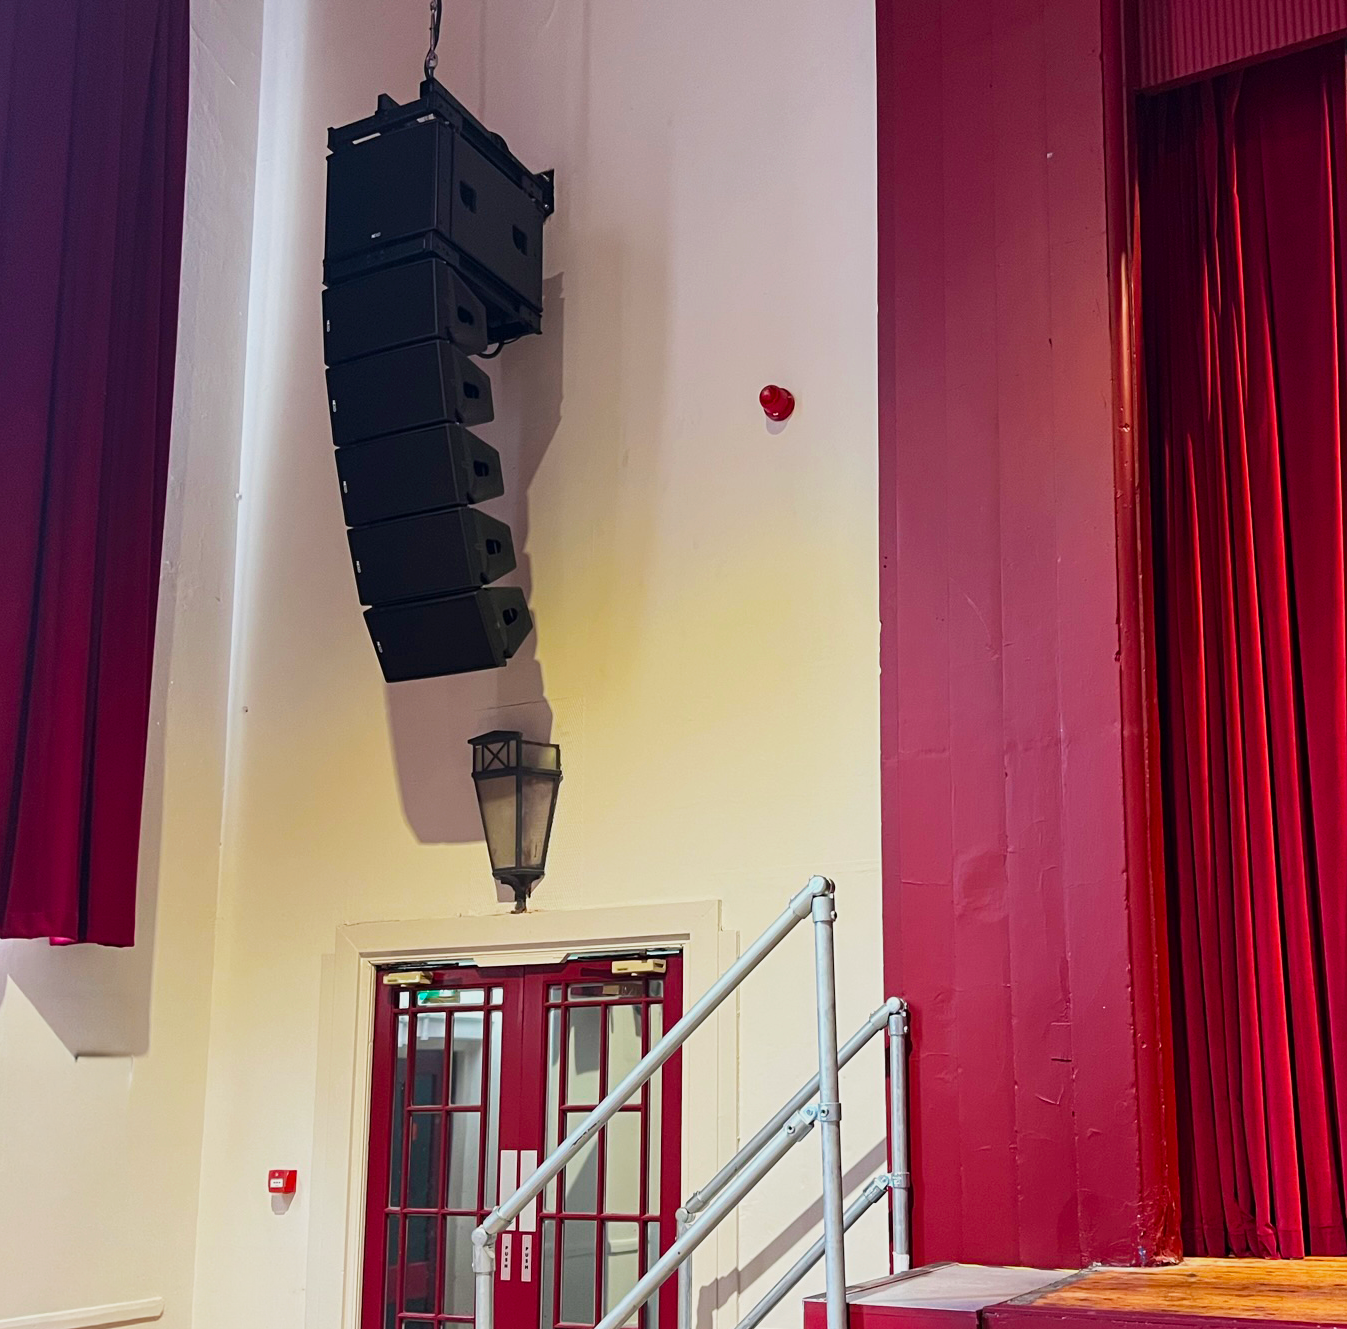 A small-town venue gets world-class sound with NEXO GEO M10